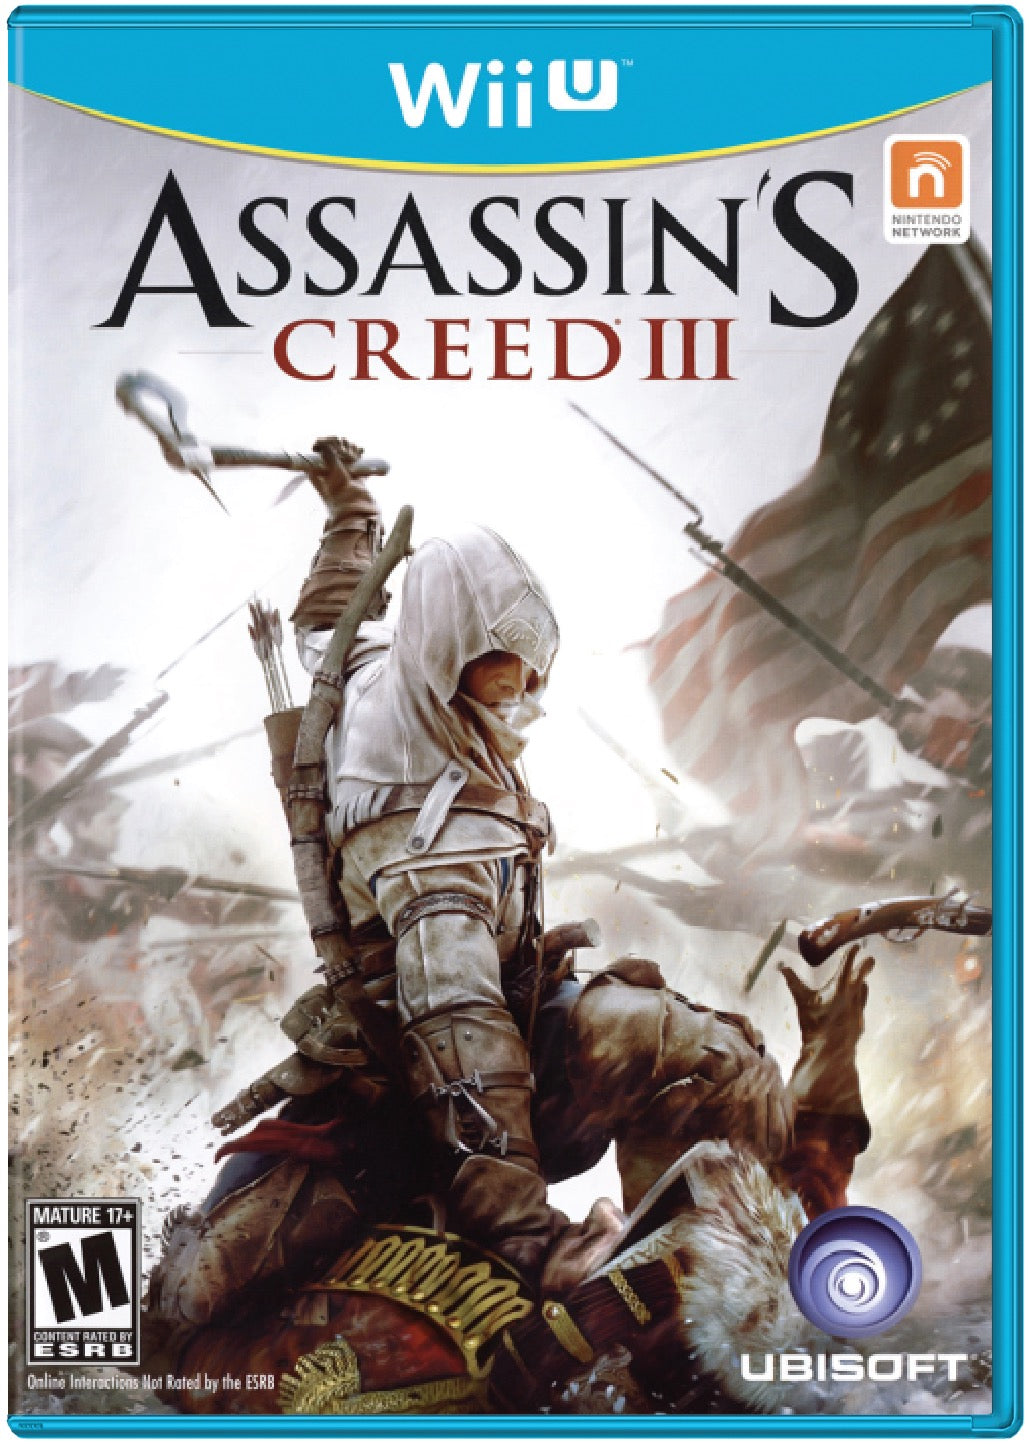 Assassin's Creed III Cover Art and Product Photo